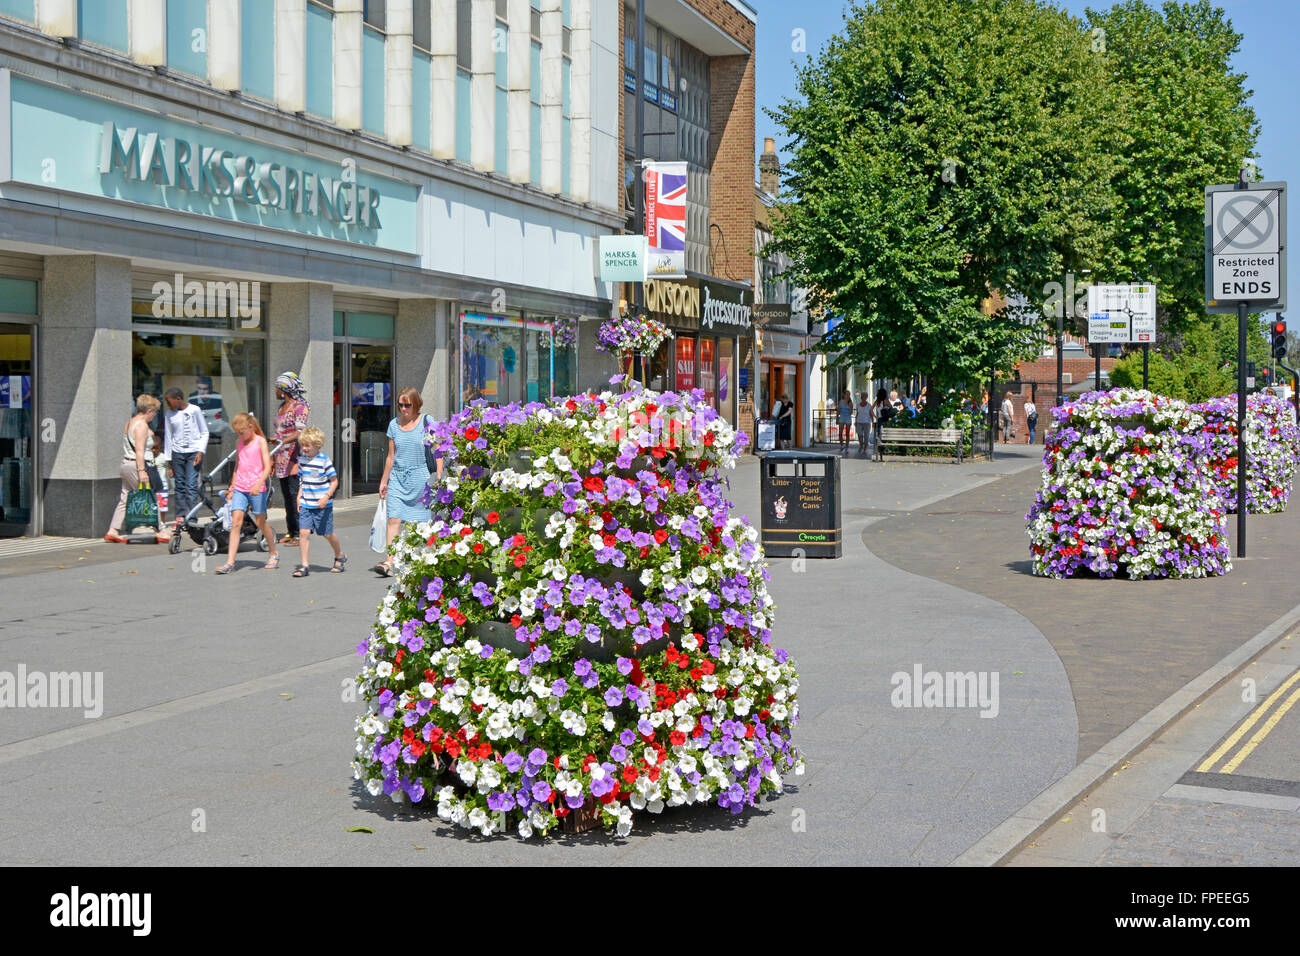 Brentwood Essex shopping high street summer flower display in planters in front of Marks & Spencer department store on wide pavement England UK Stock Photo